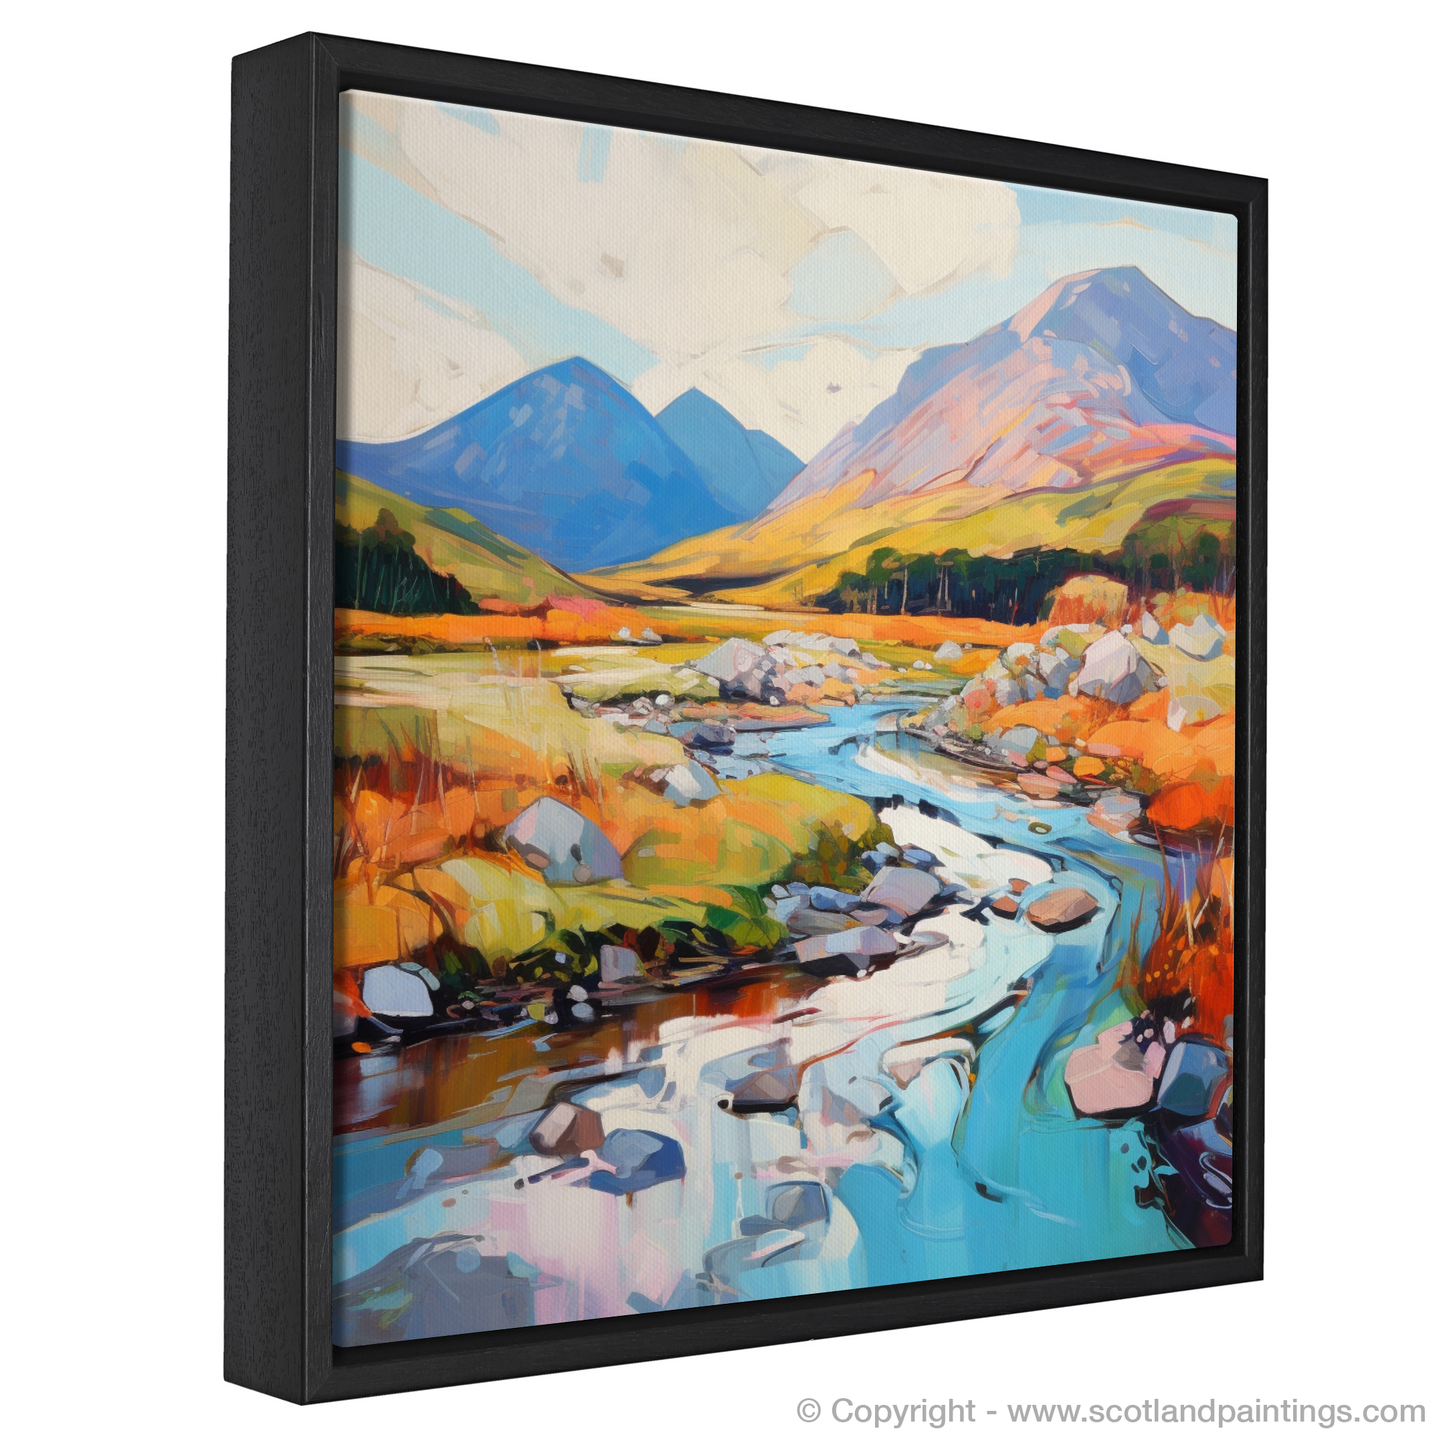 Painting and Art Print of Glen Sannox, Isle of Arran in summer entitled "Summer Symphony in Glen Sannox".